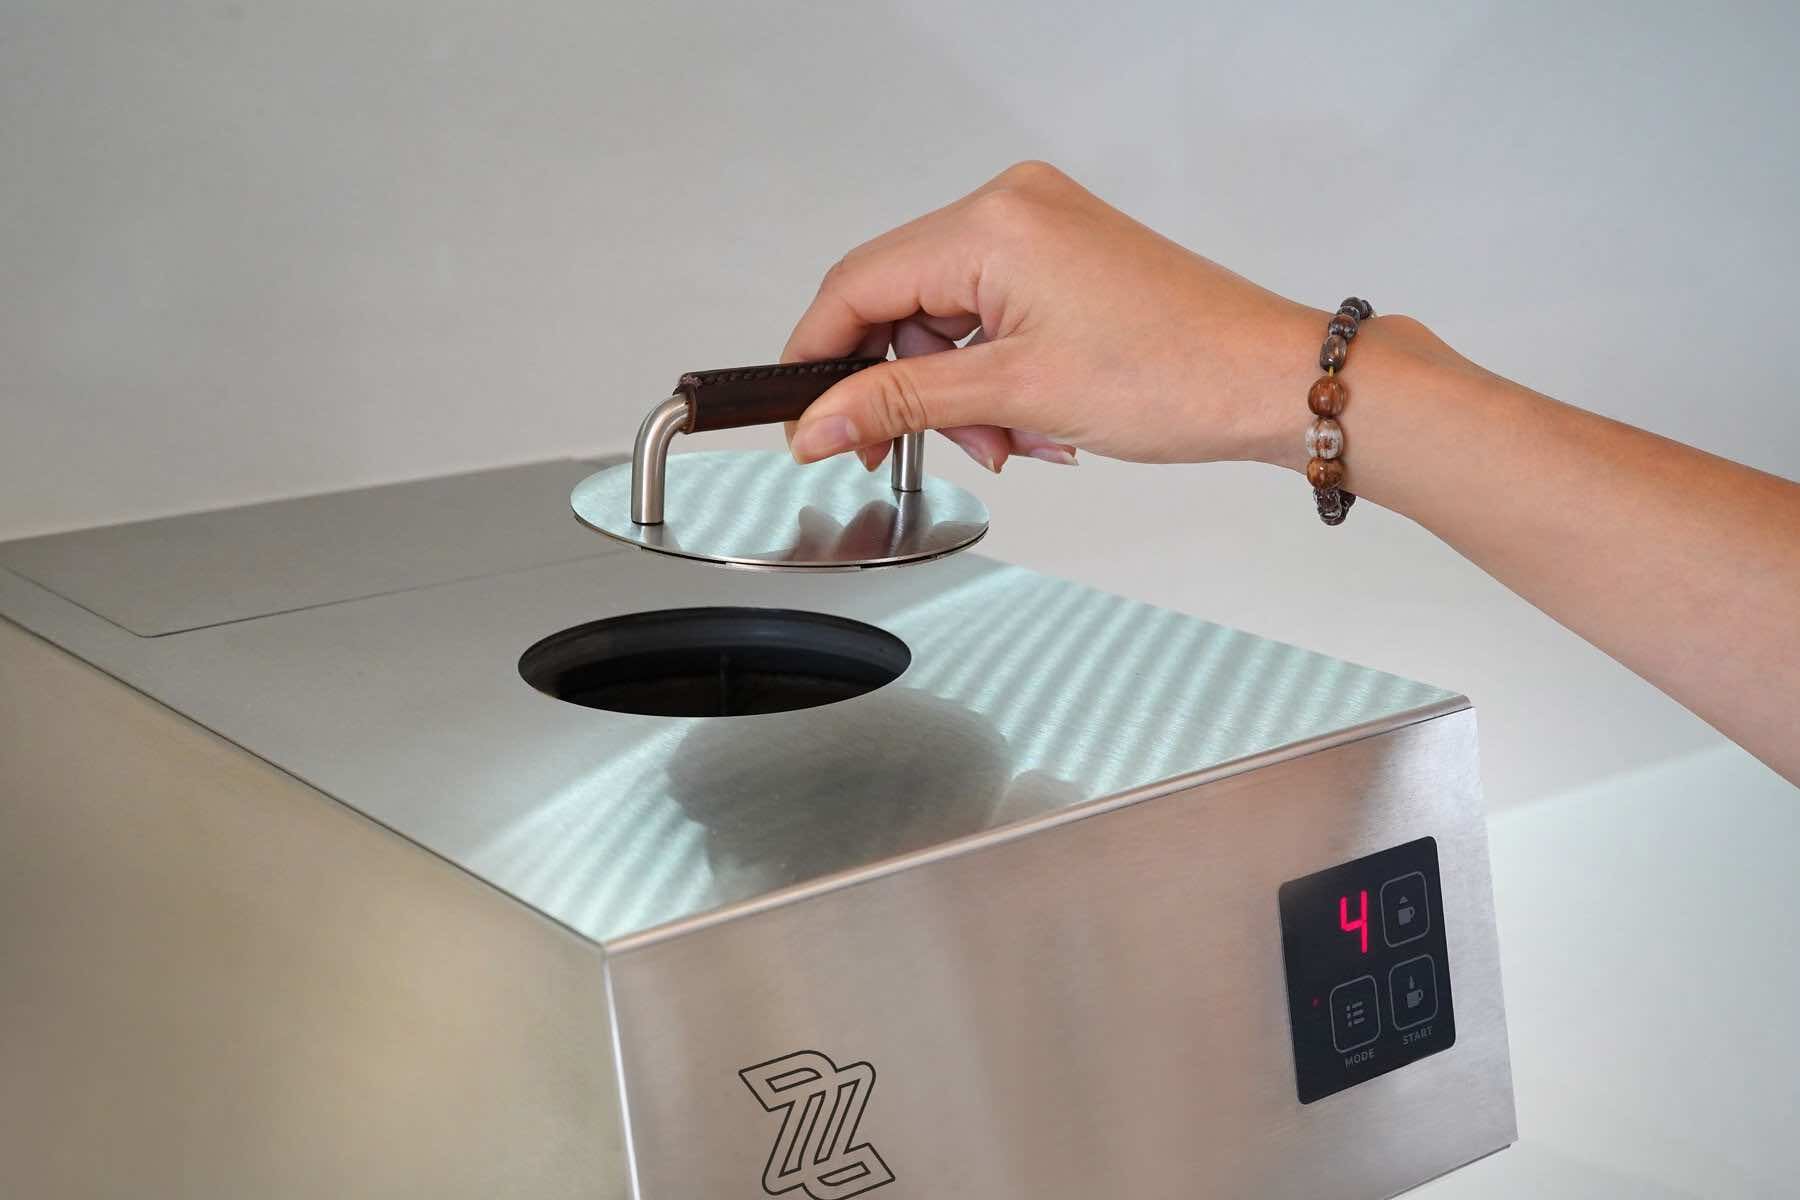  Brushed stainless steel and streamlined design make Zou Zou Coffee machines easy to clean.  